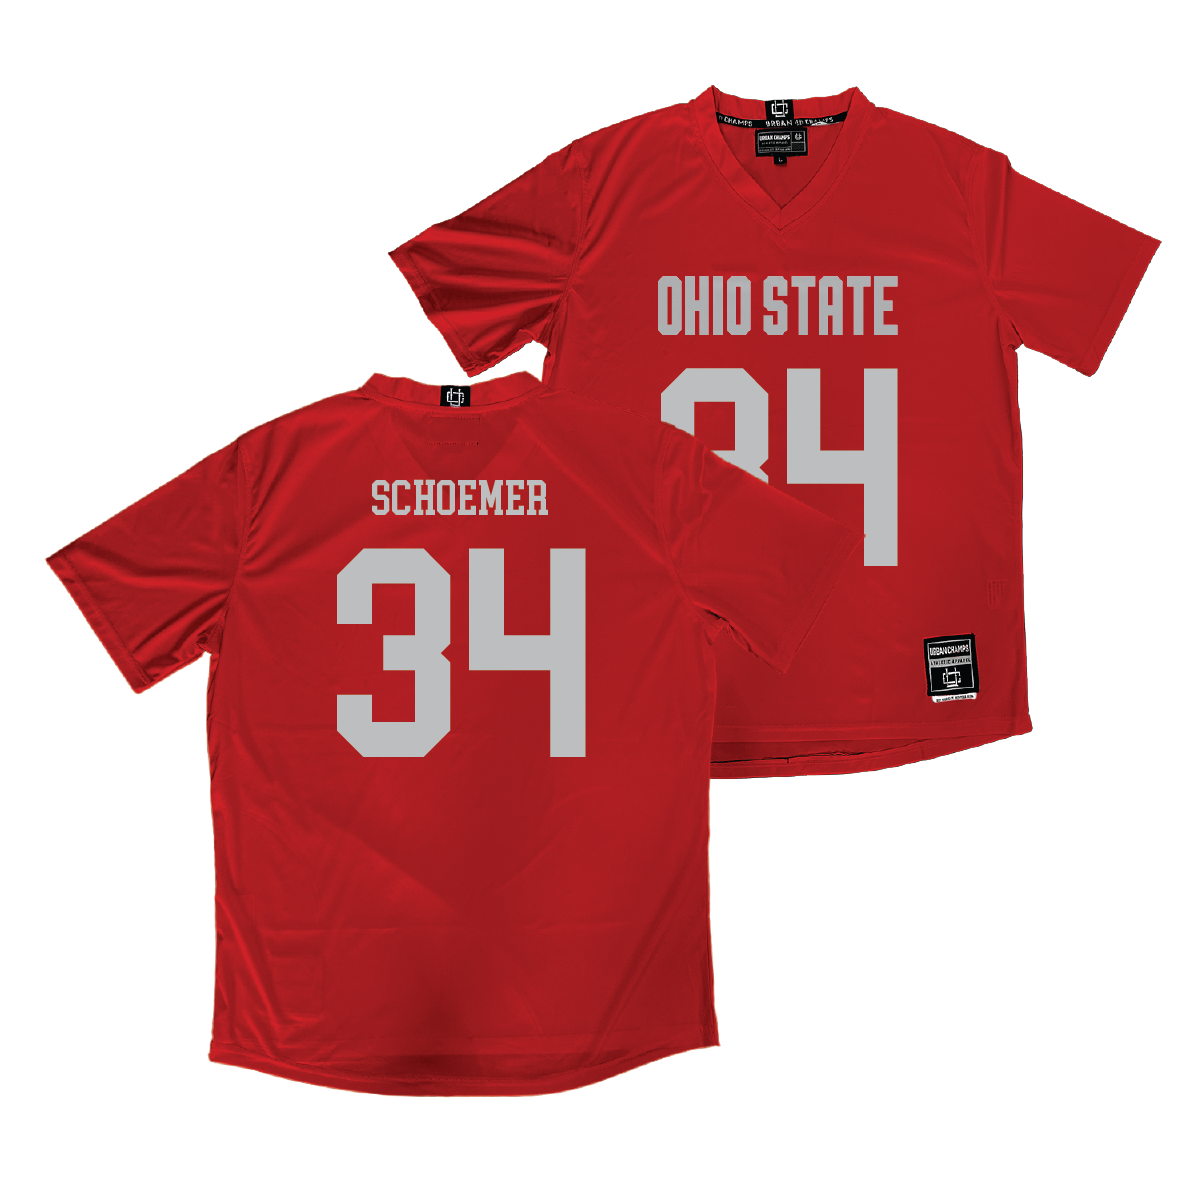 Ohio State Women's Lacrosse Red Jersey - Audrey Schoemer | #34